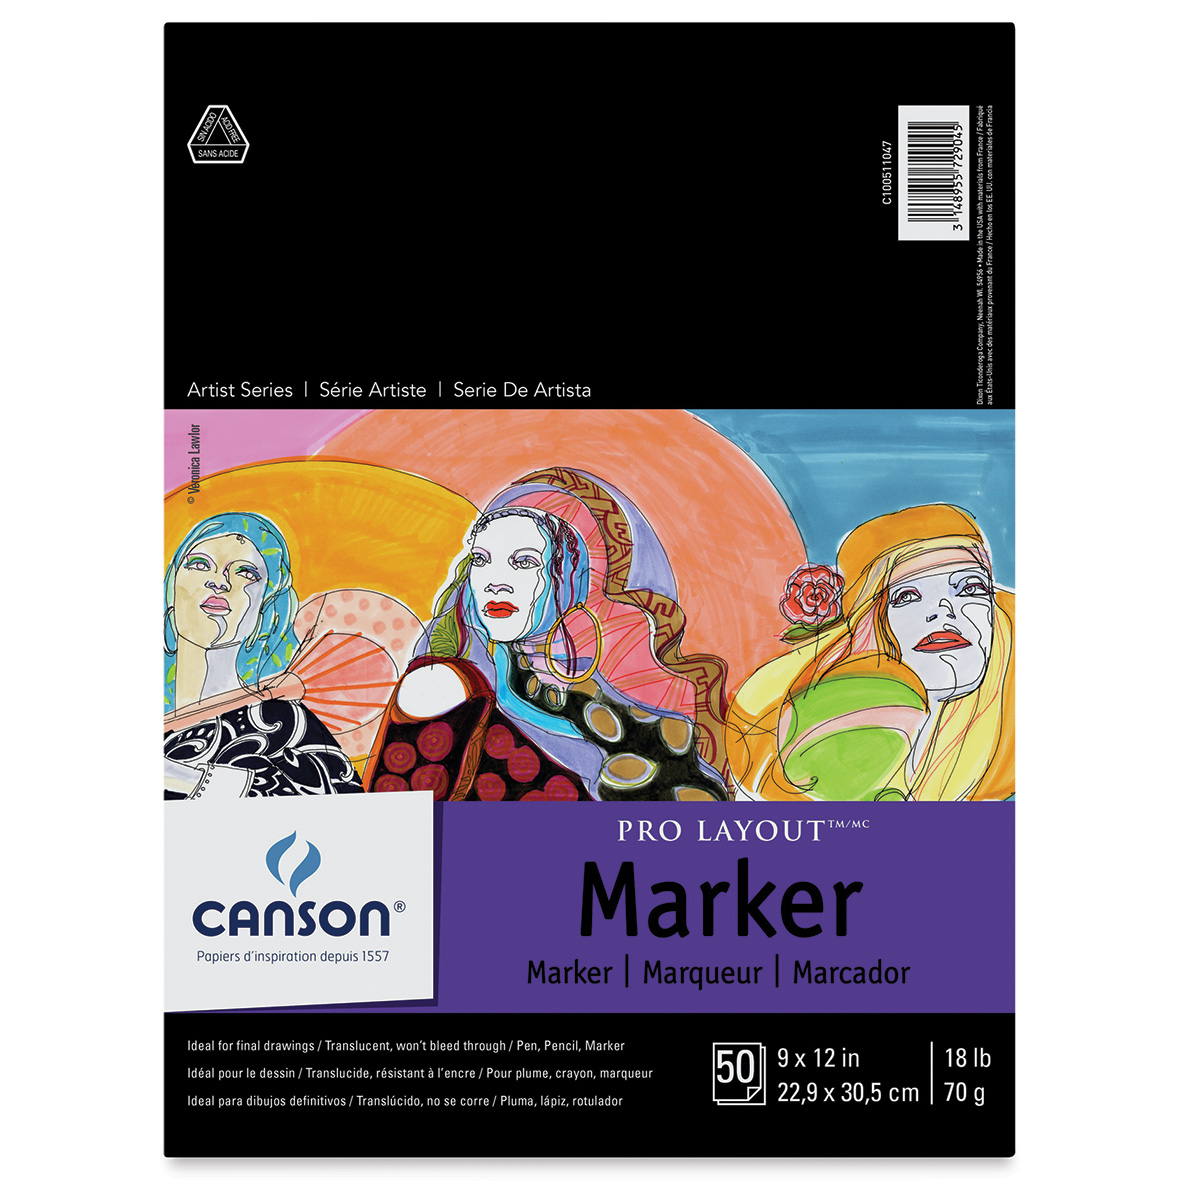 Canson ProLayout Marker Paper